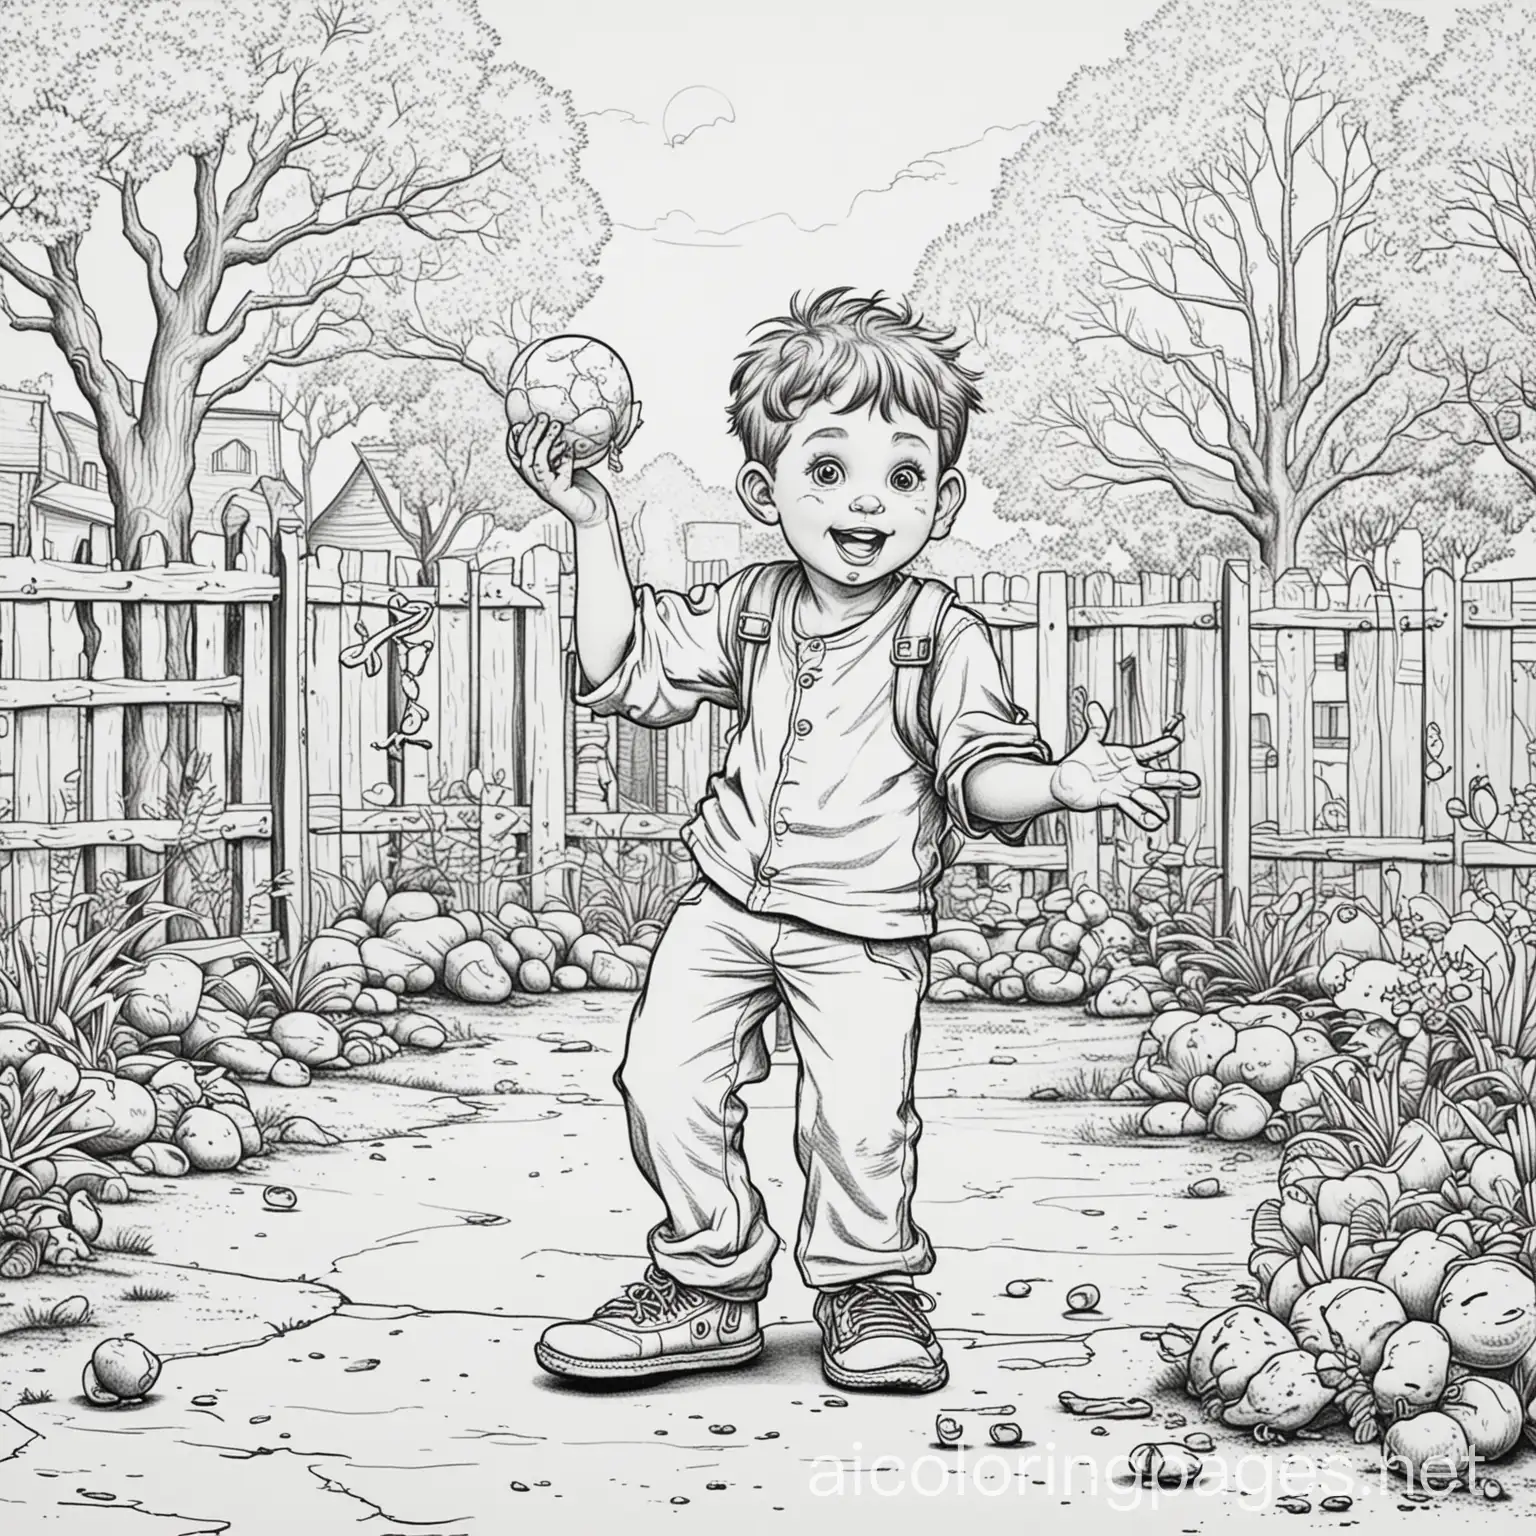 a cartoon Boy in a ghetto park, featuring a comical talent show where local residents showcase their unique skills, such as a juggler with rubber chickens and a contortionist escape artist. Coloring Page, black and white, line art, white background, Simplicity, Ample White Space, The background of the coloring page is plain white to make it easy for young children to color within the lines. The outlines of all the subjects are easy to distinguish, making it simple for kids to color without too much difficulty